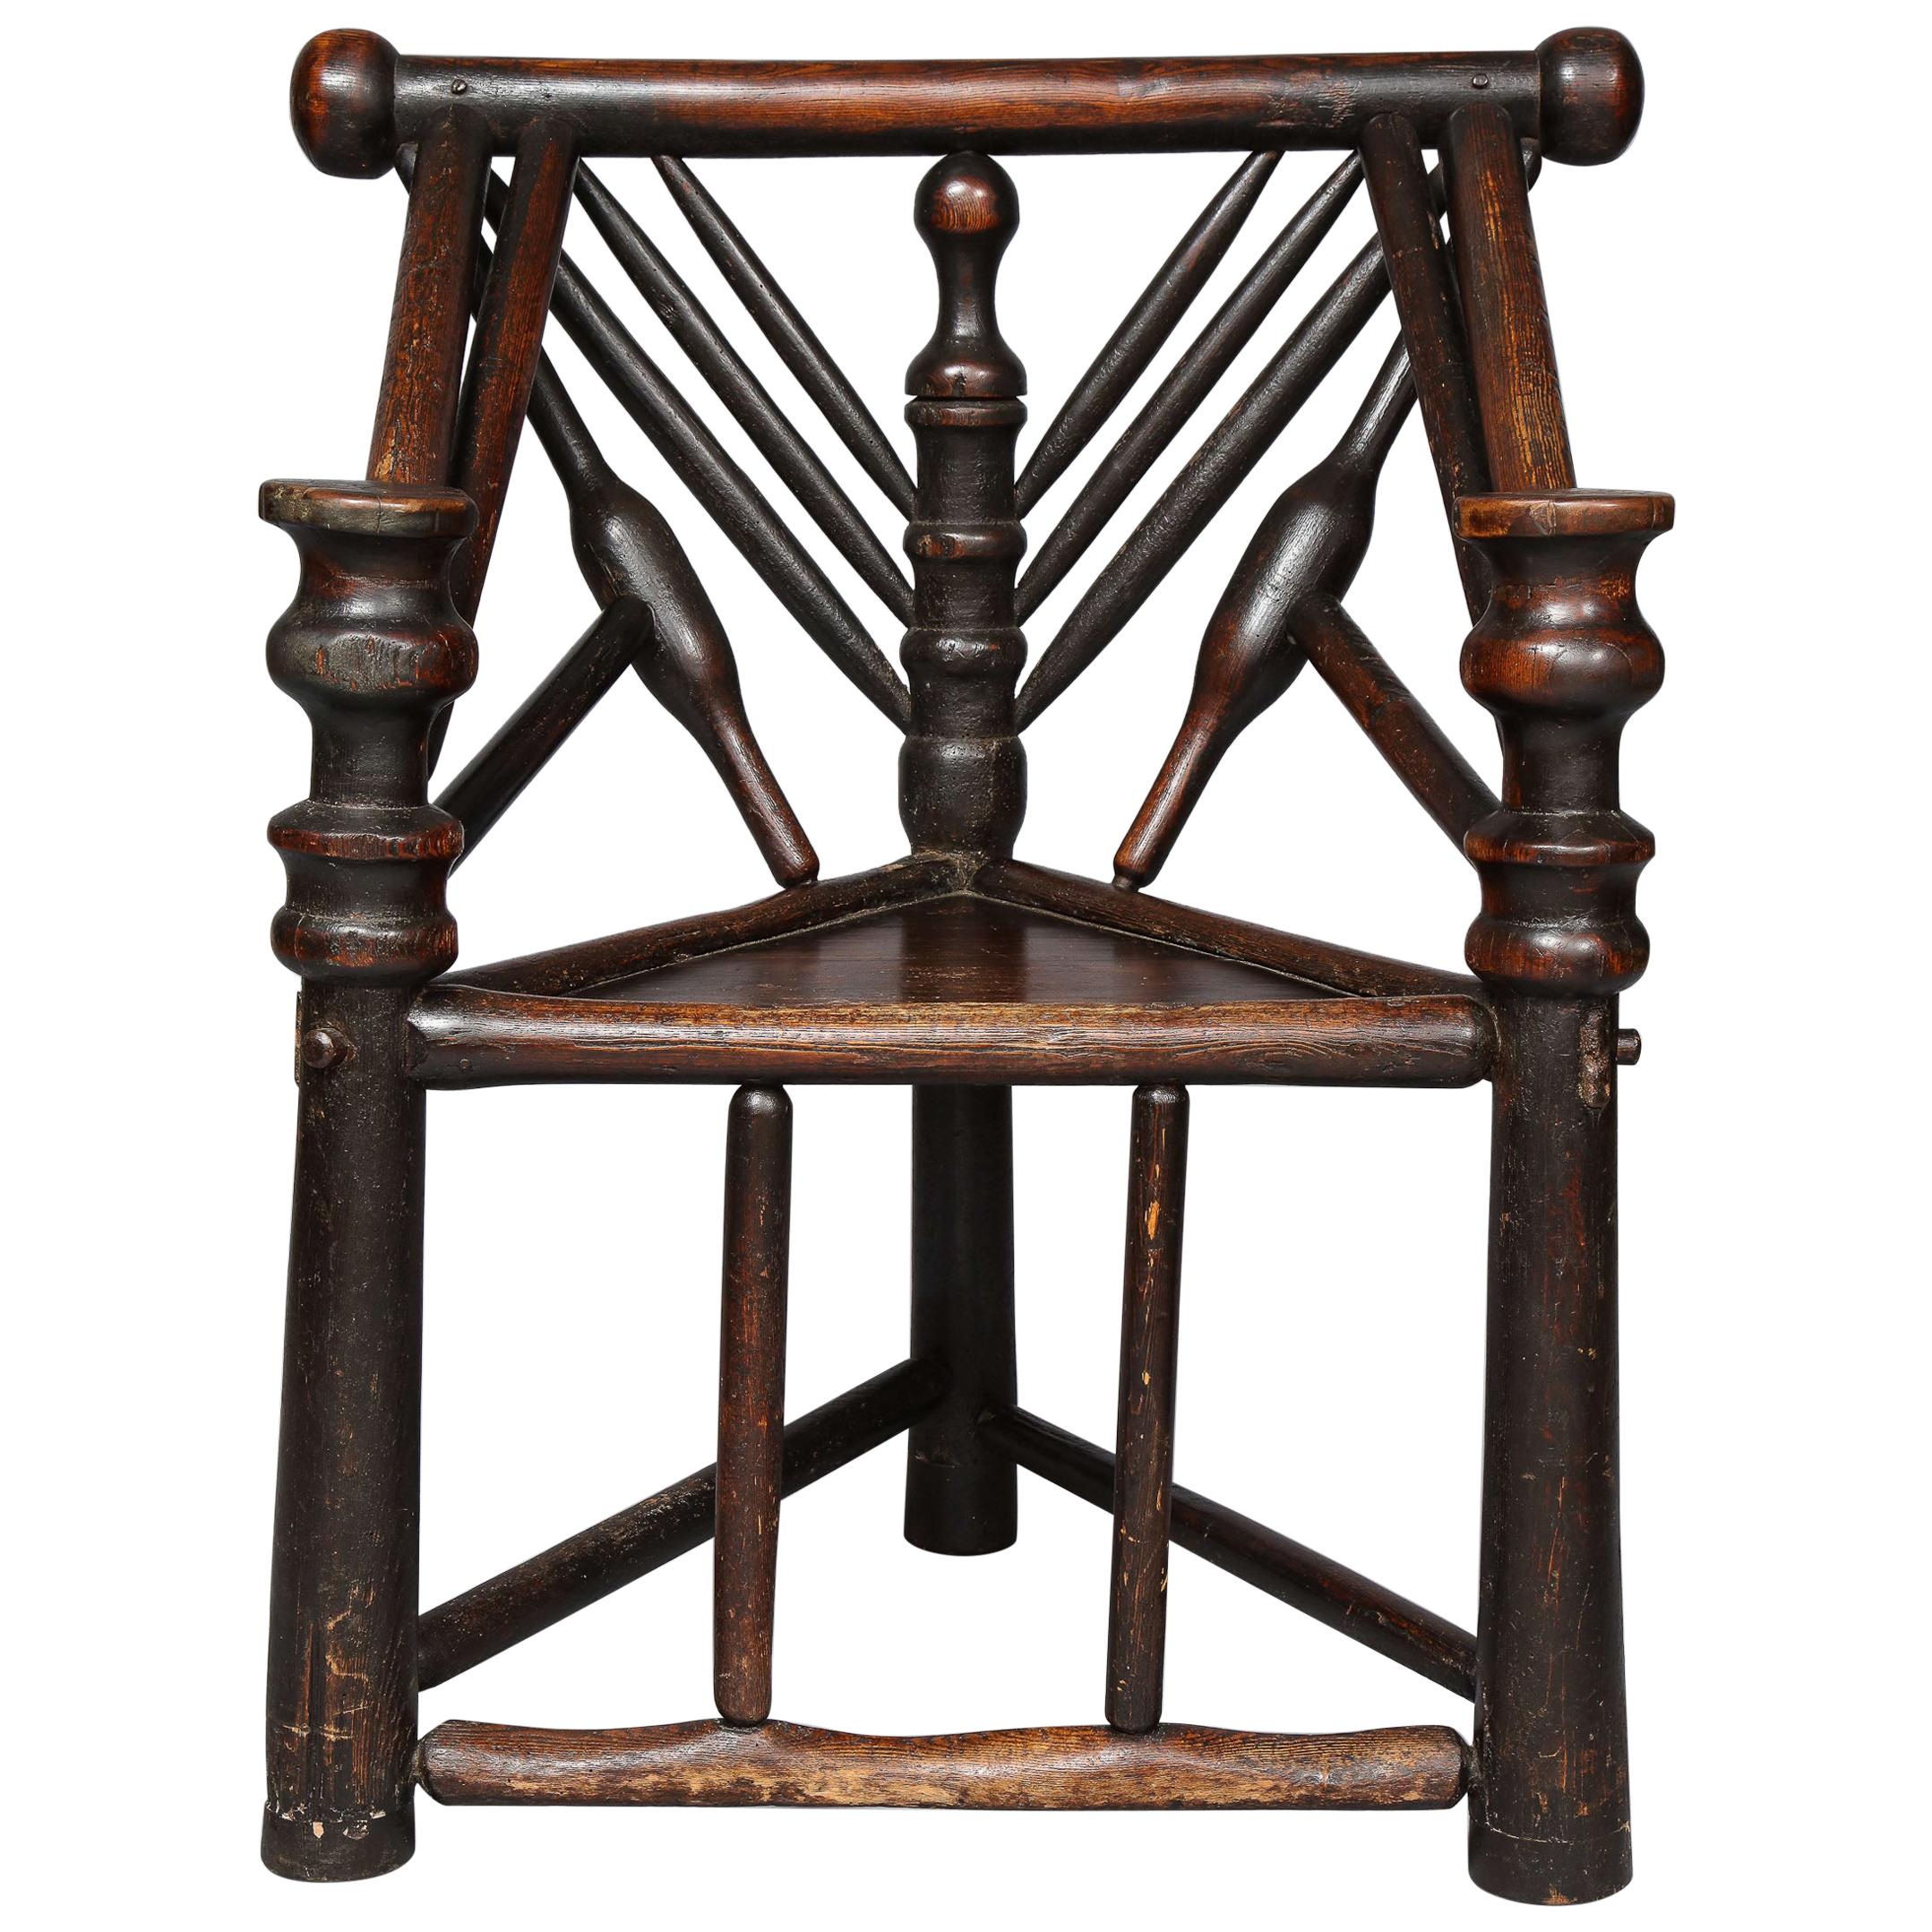 Early English or Scottish Turner's Chair 